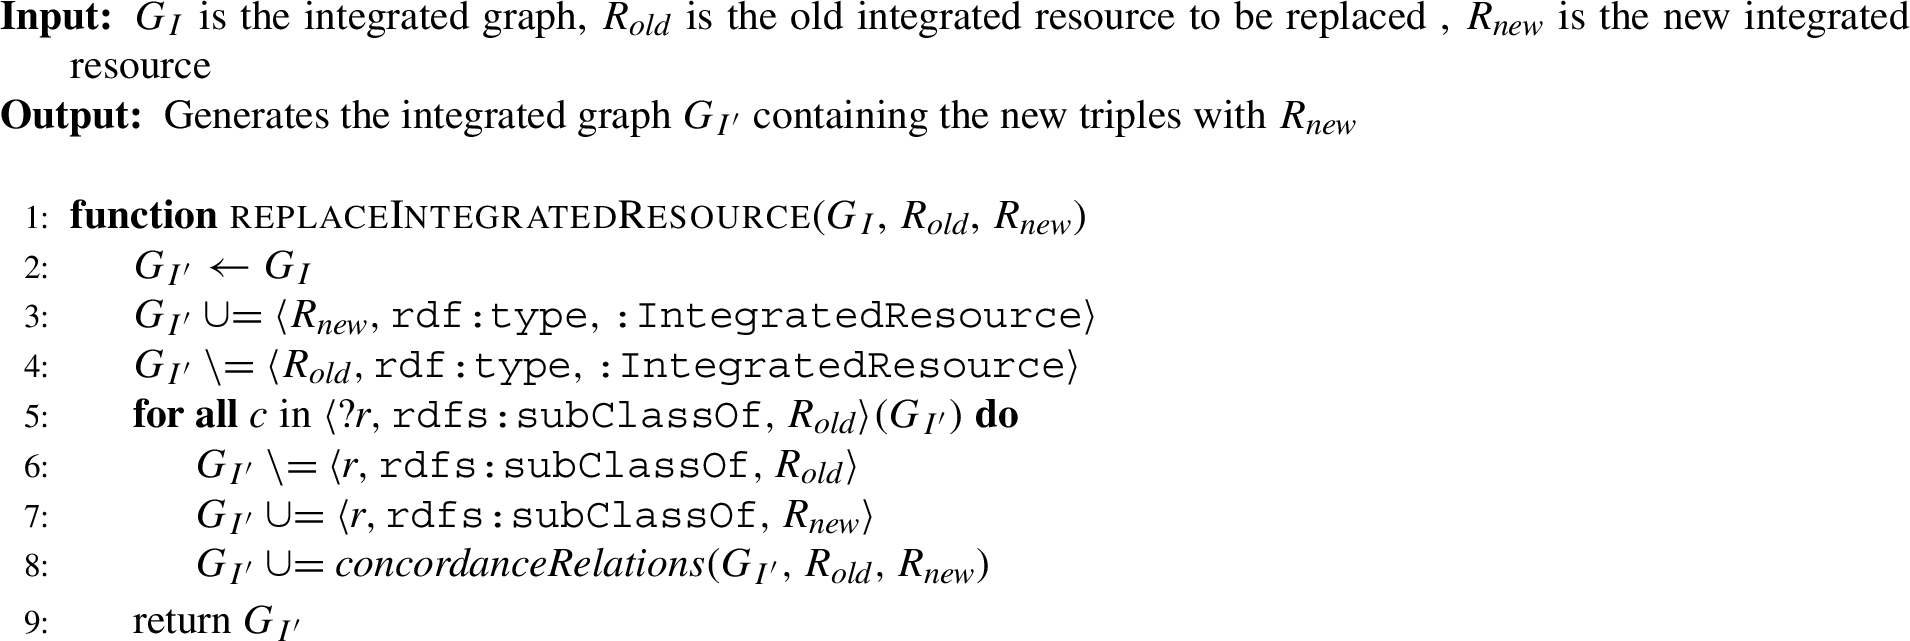 Replace integrated resource – classes